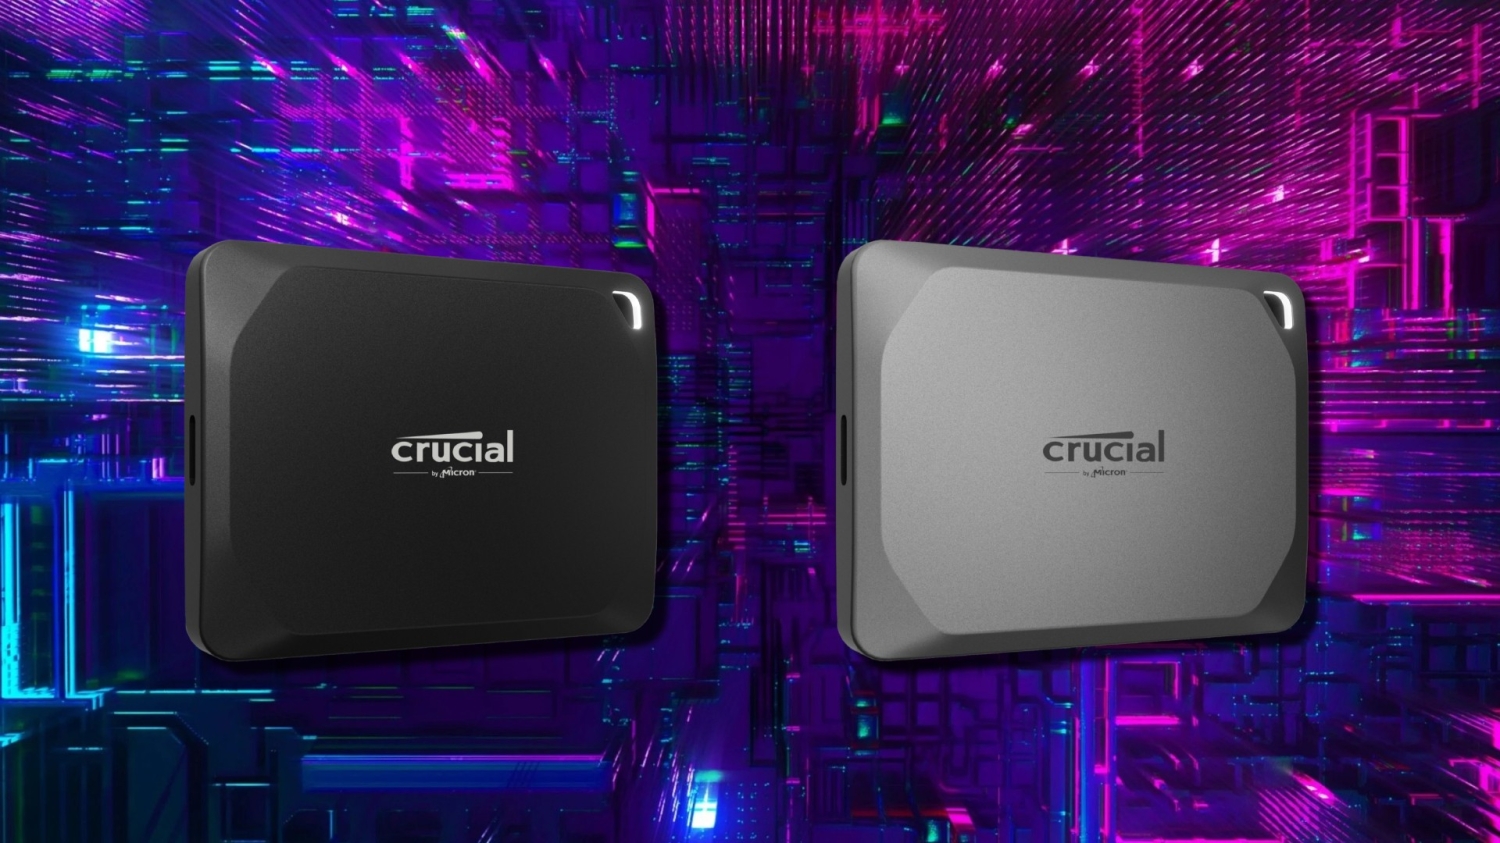 Crucial X9 Pro and X10 Pro are fast SSDs built for creators